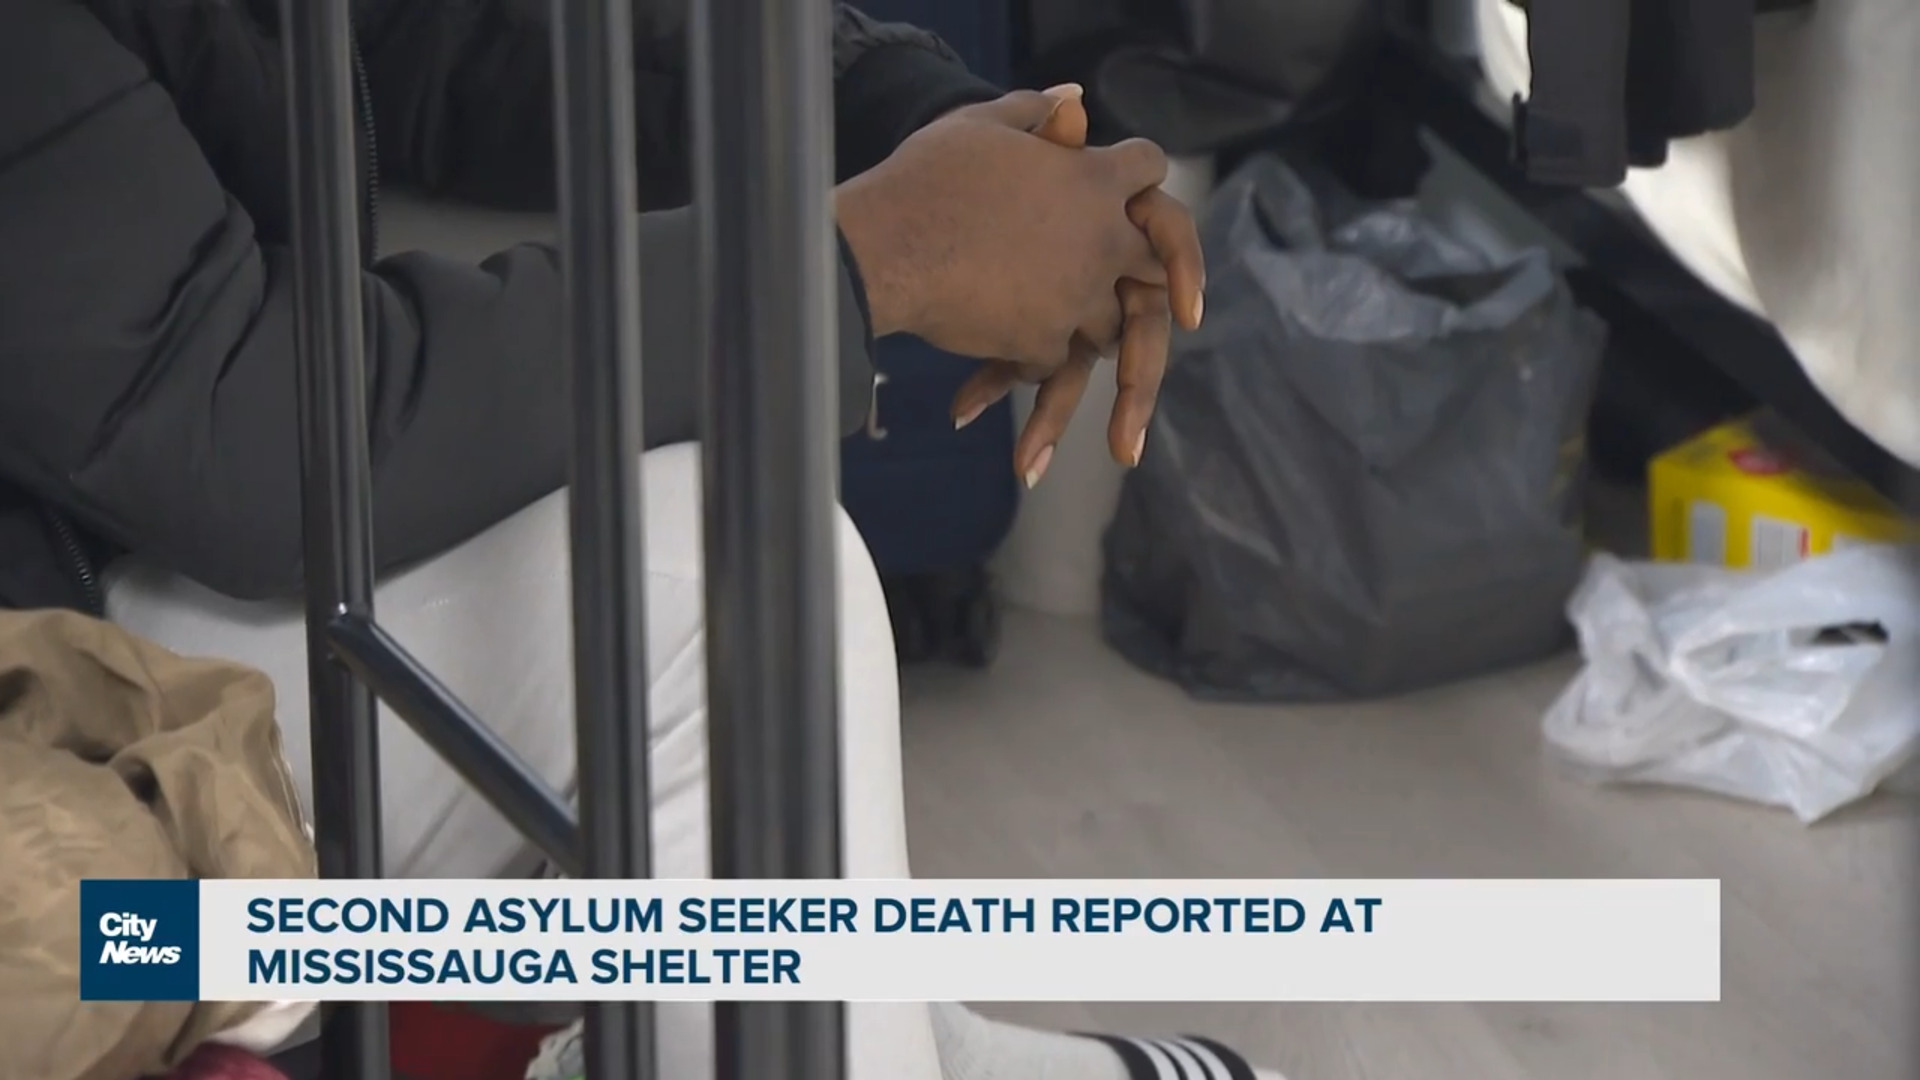 A second asylum seeker died at a Mississauga shelter